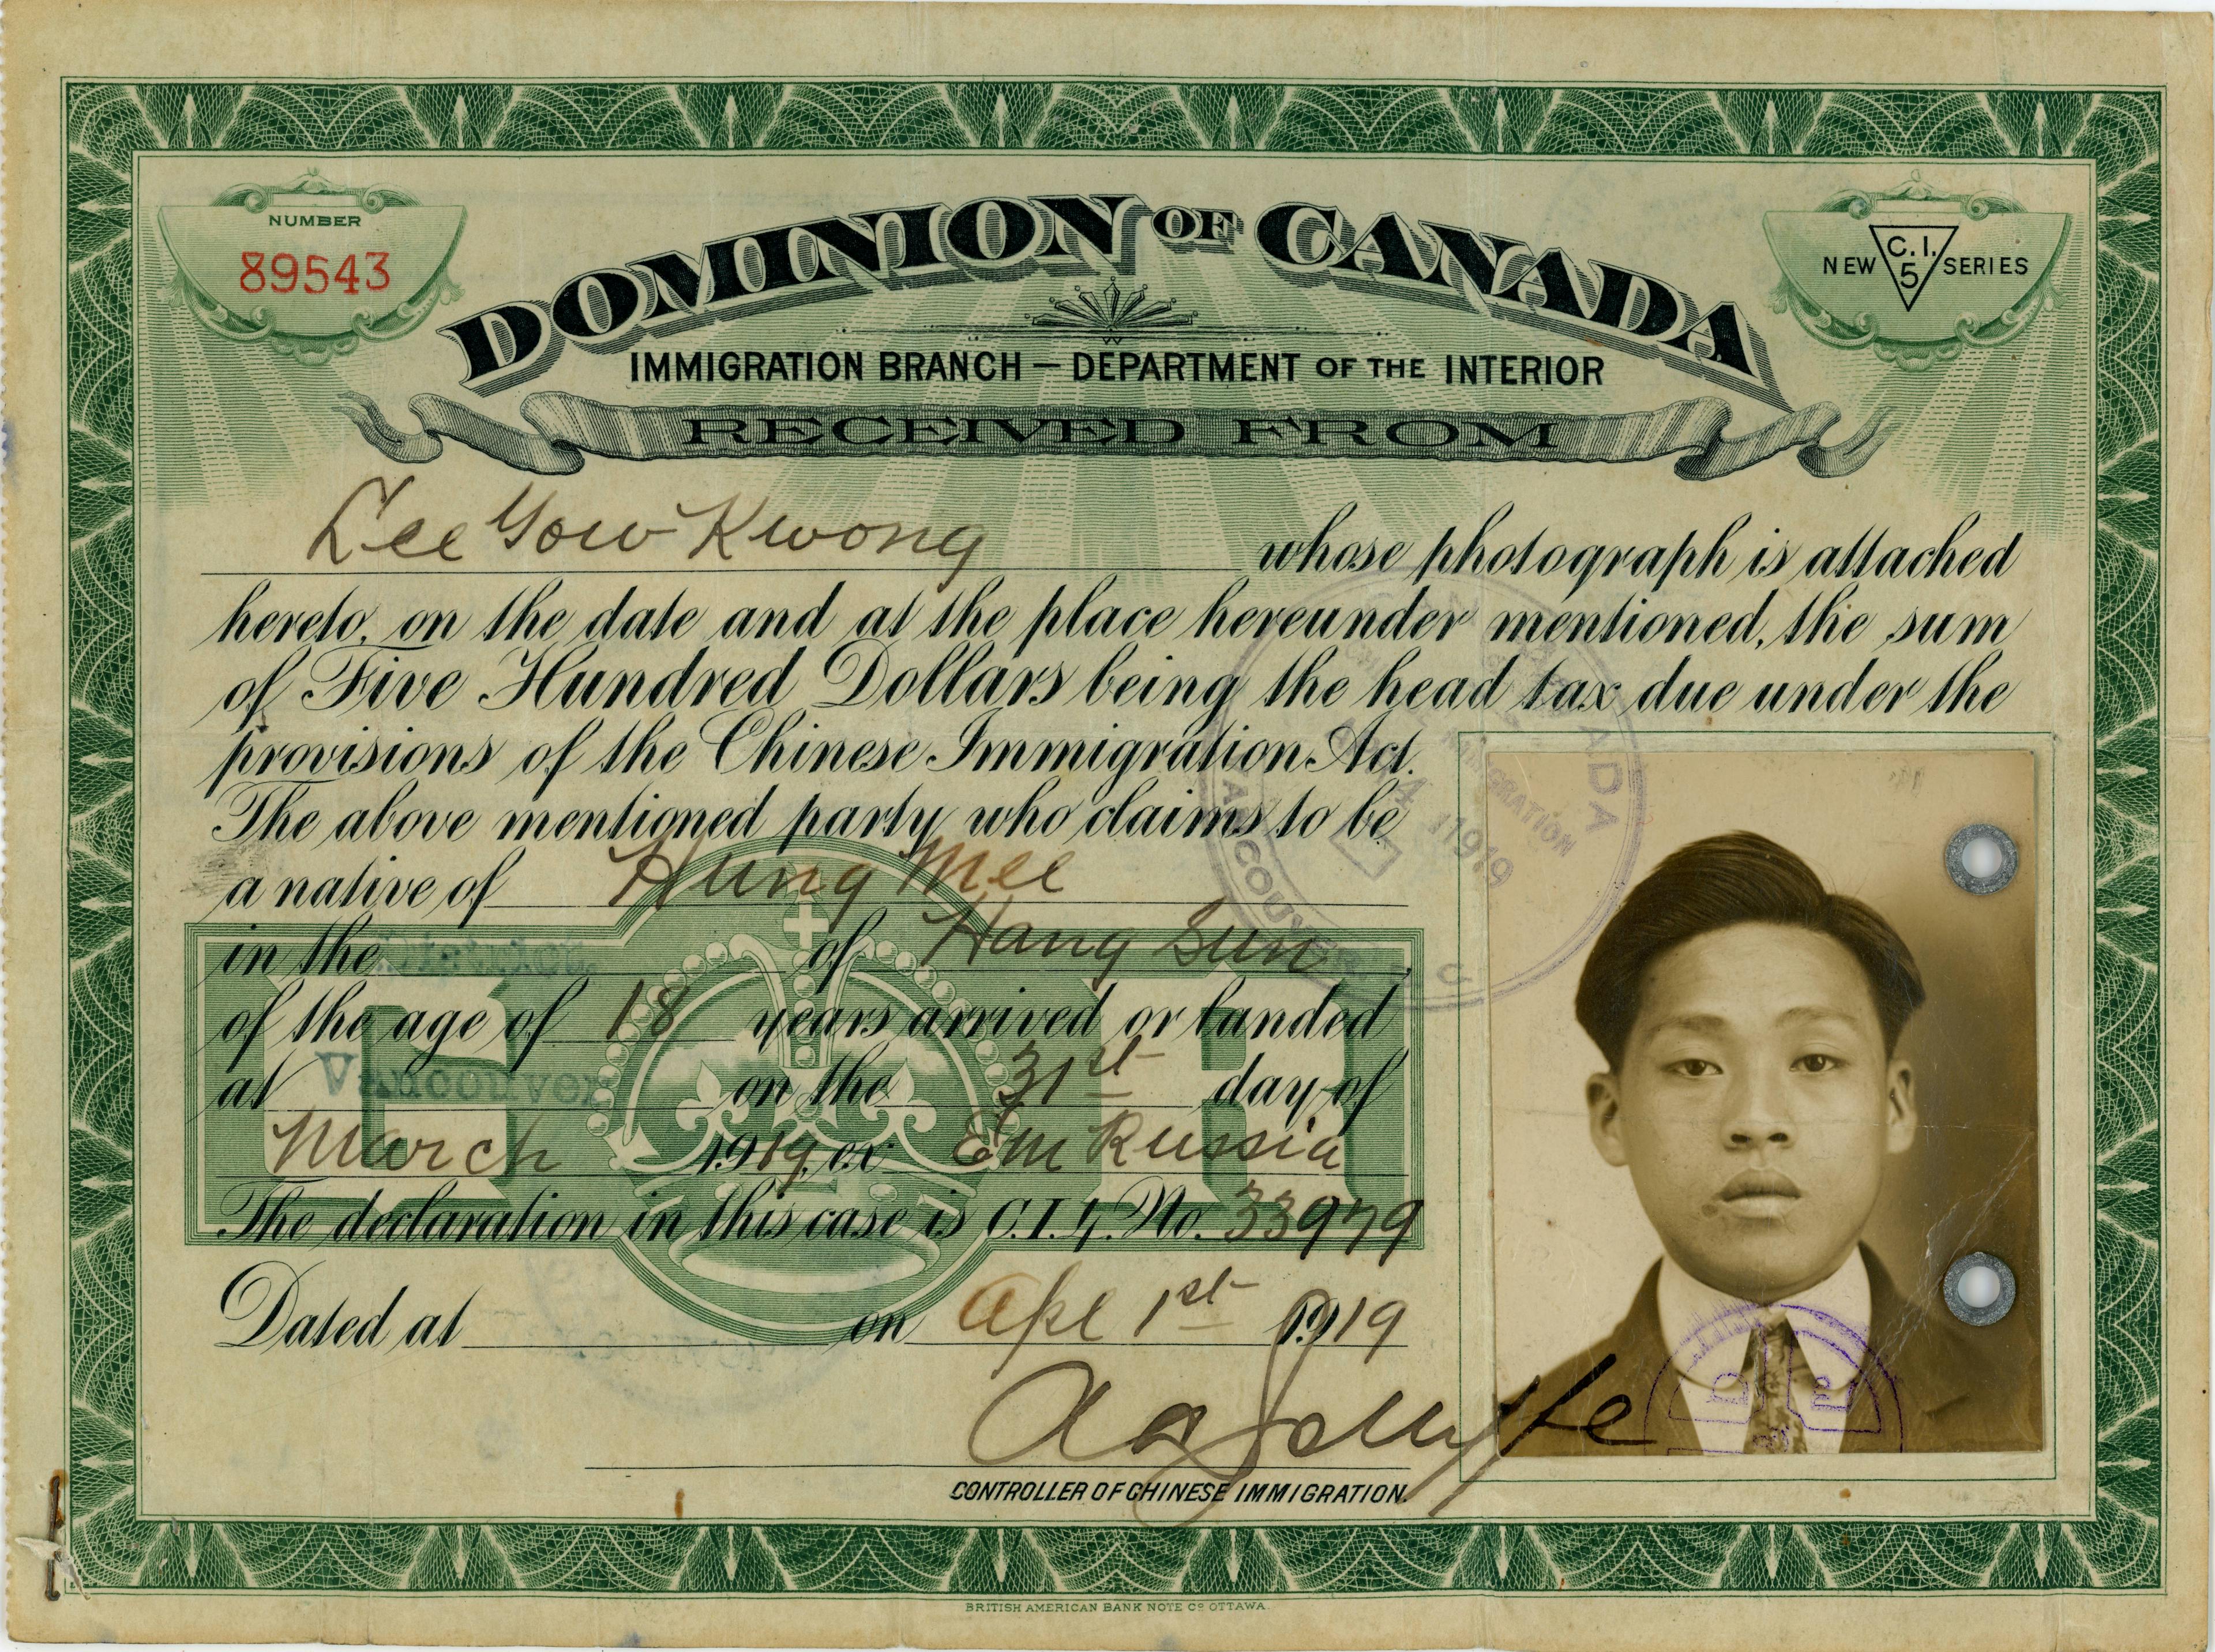 Call for C.I. Certificates: Canada-wide Community Scanning for "The Paper Trail"